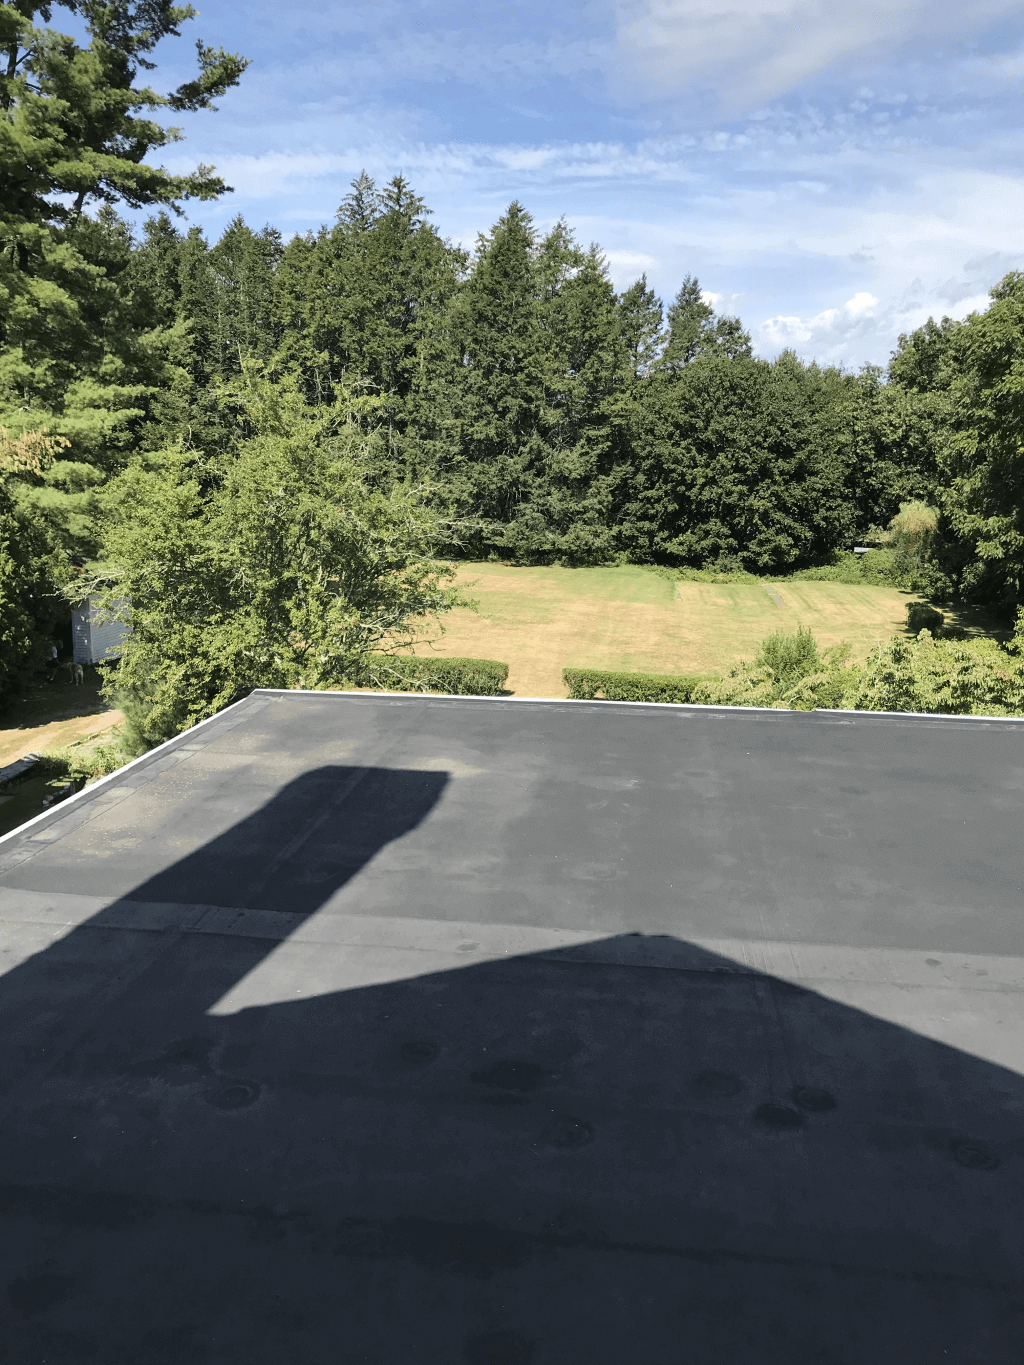 Rubber Roof prior to Rooftop Deck Construction near Boston MA